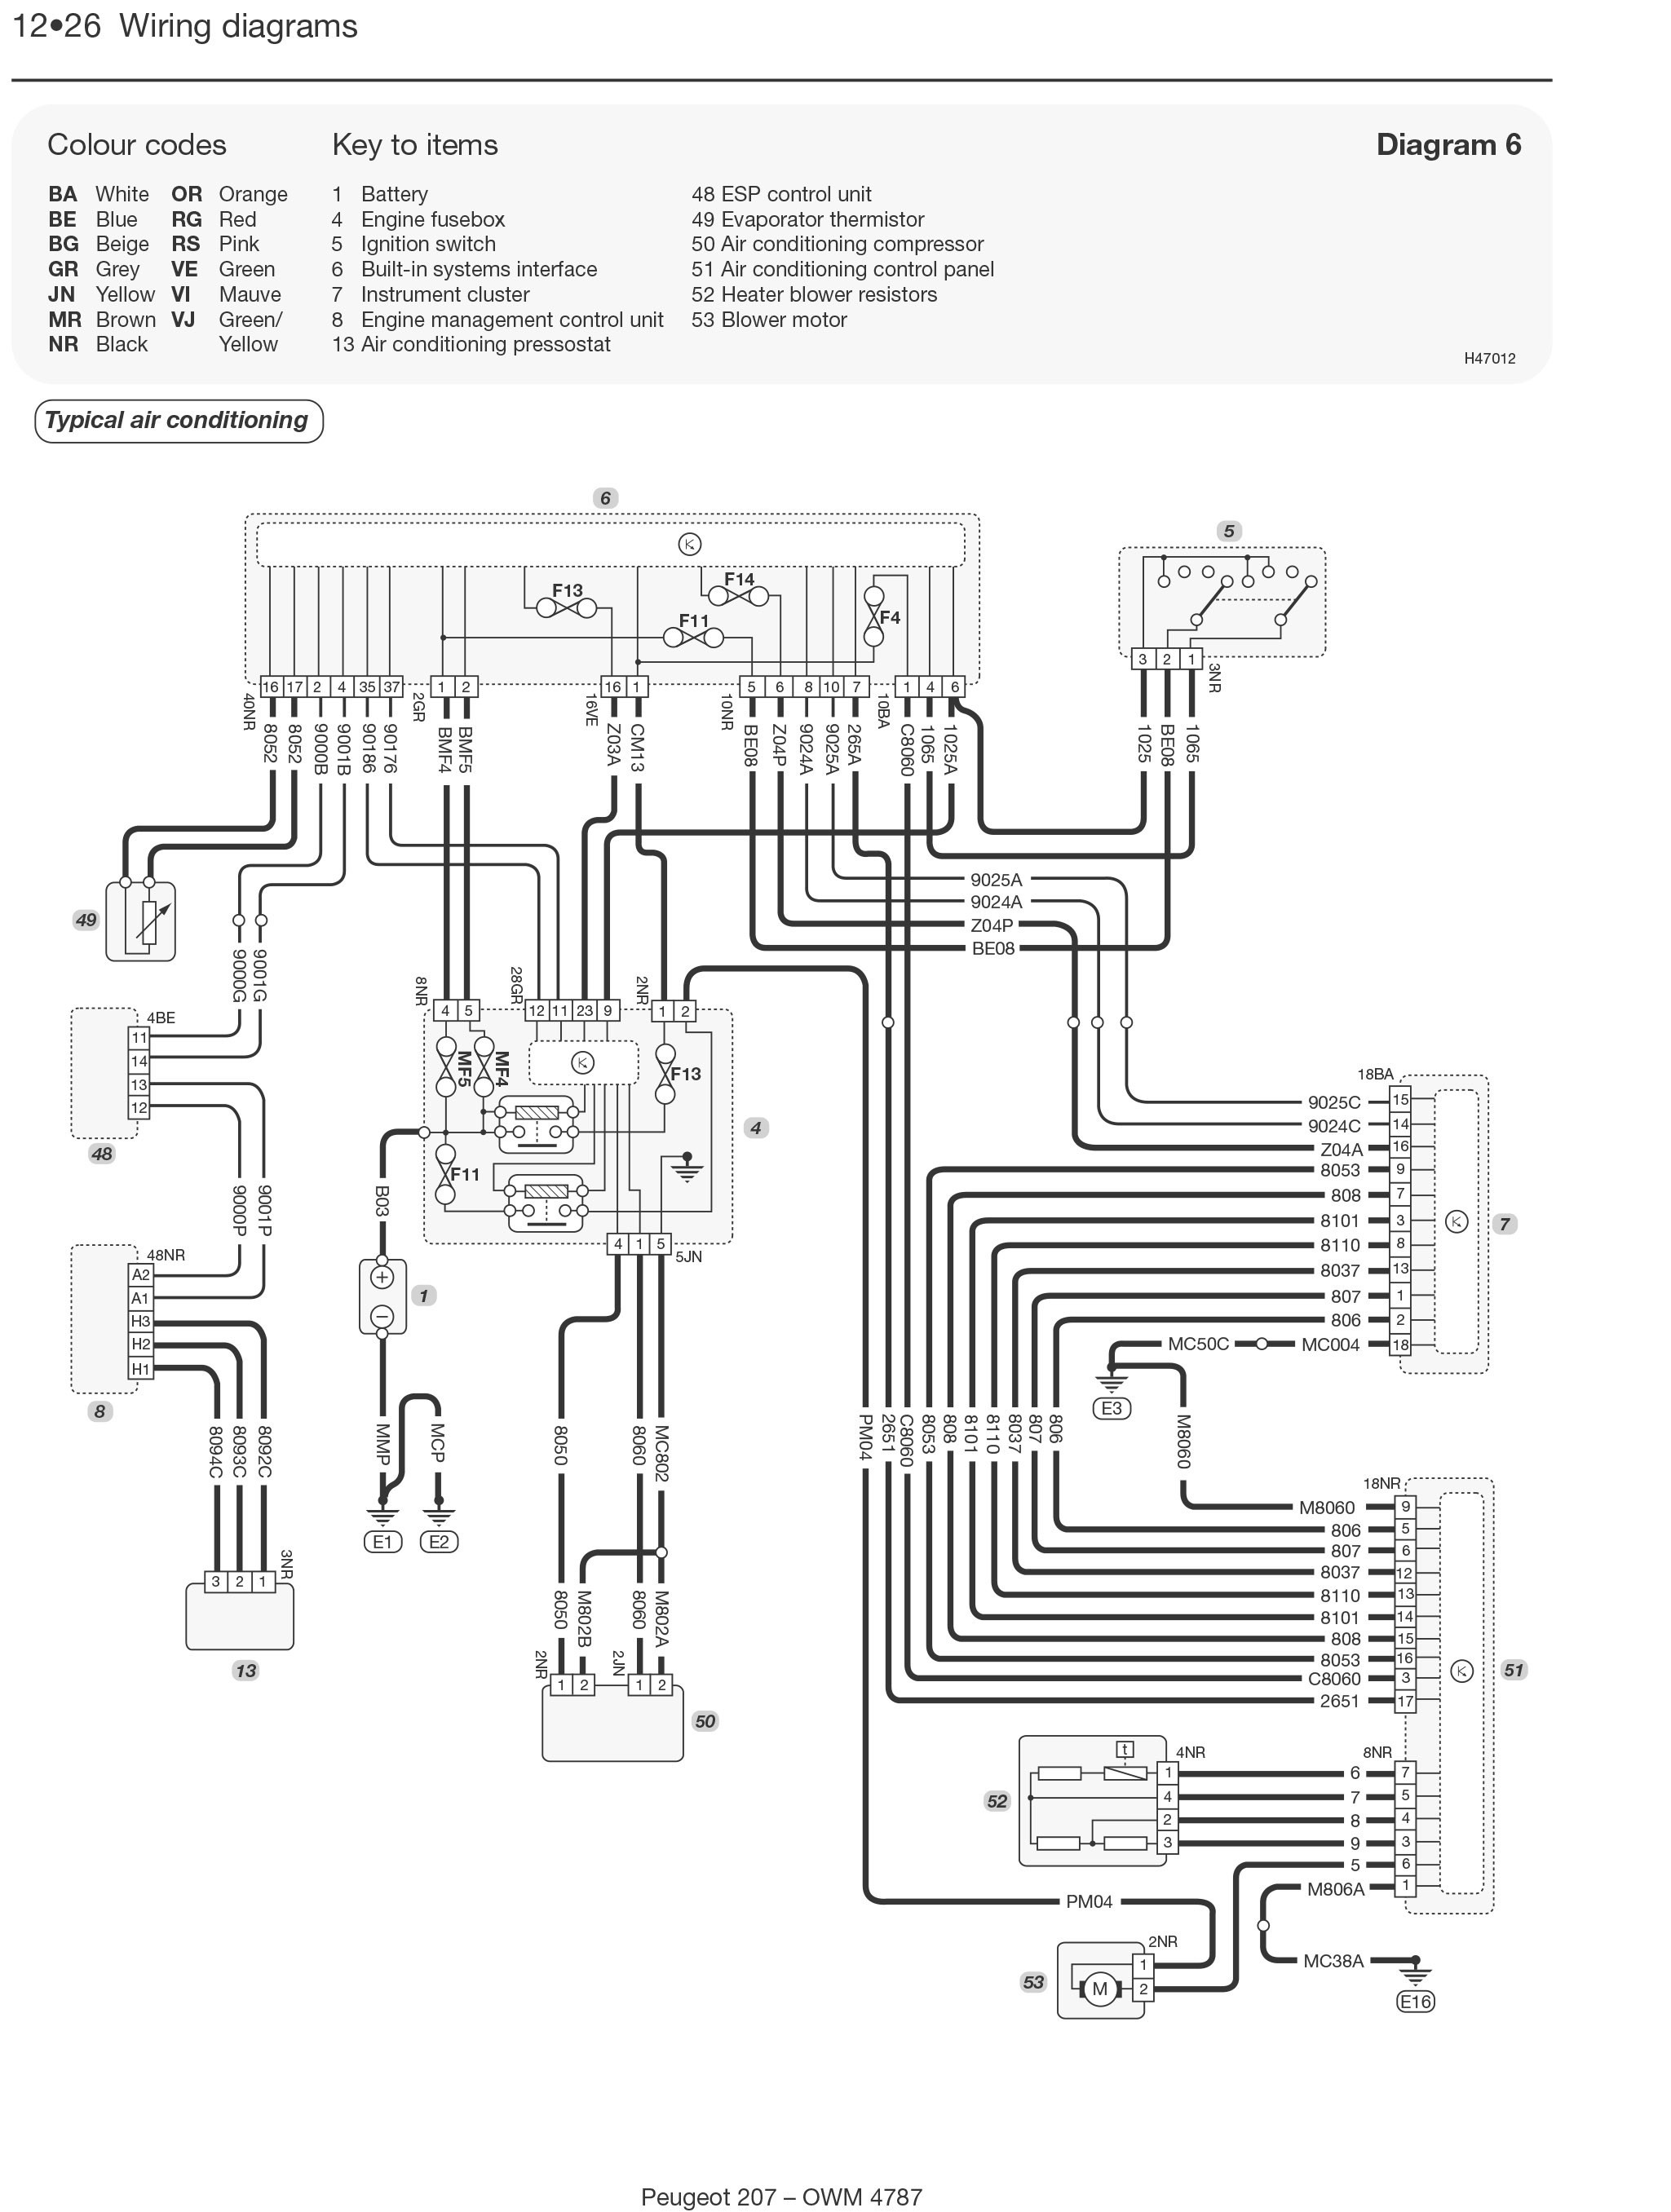 Amazing Pioneer Avic D3 Wiring Diagram Gallery Symbol For And